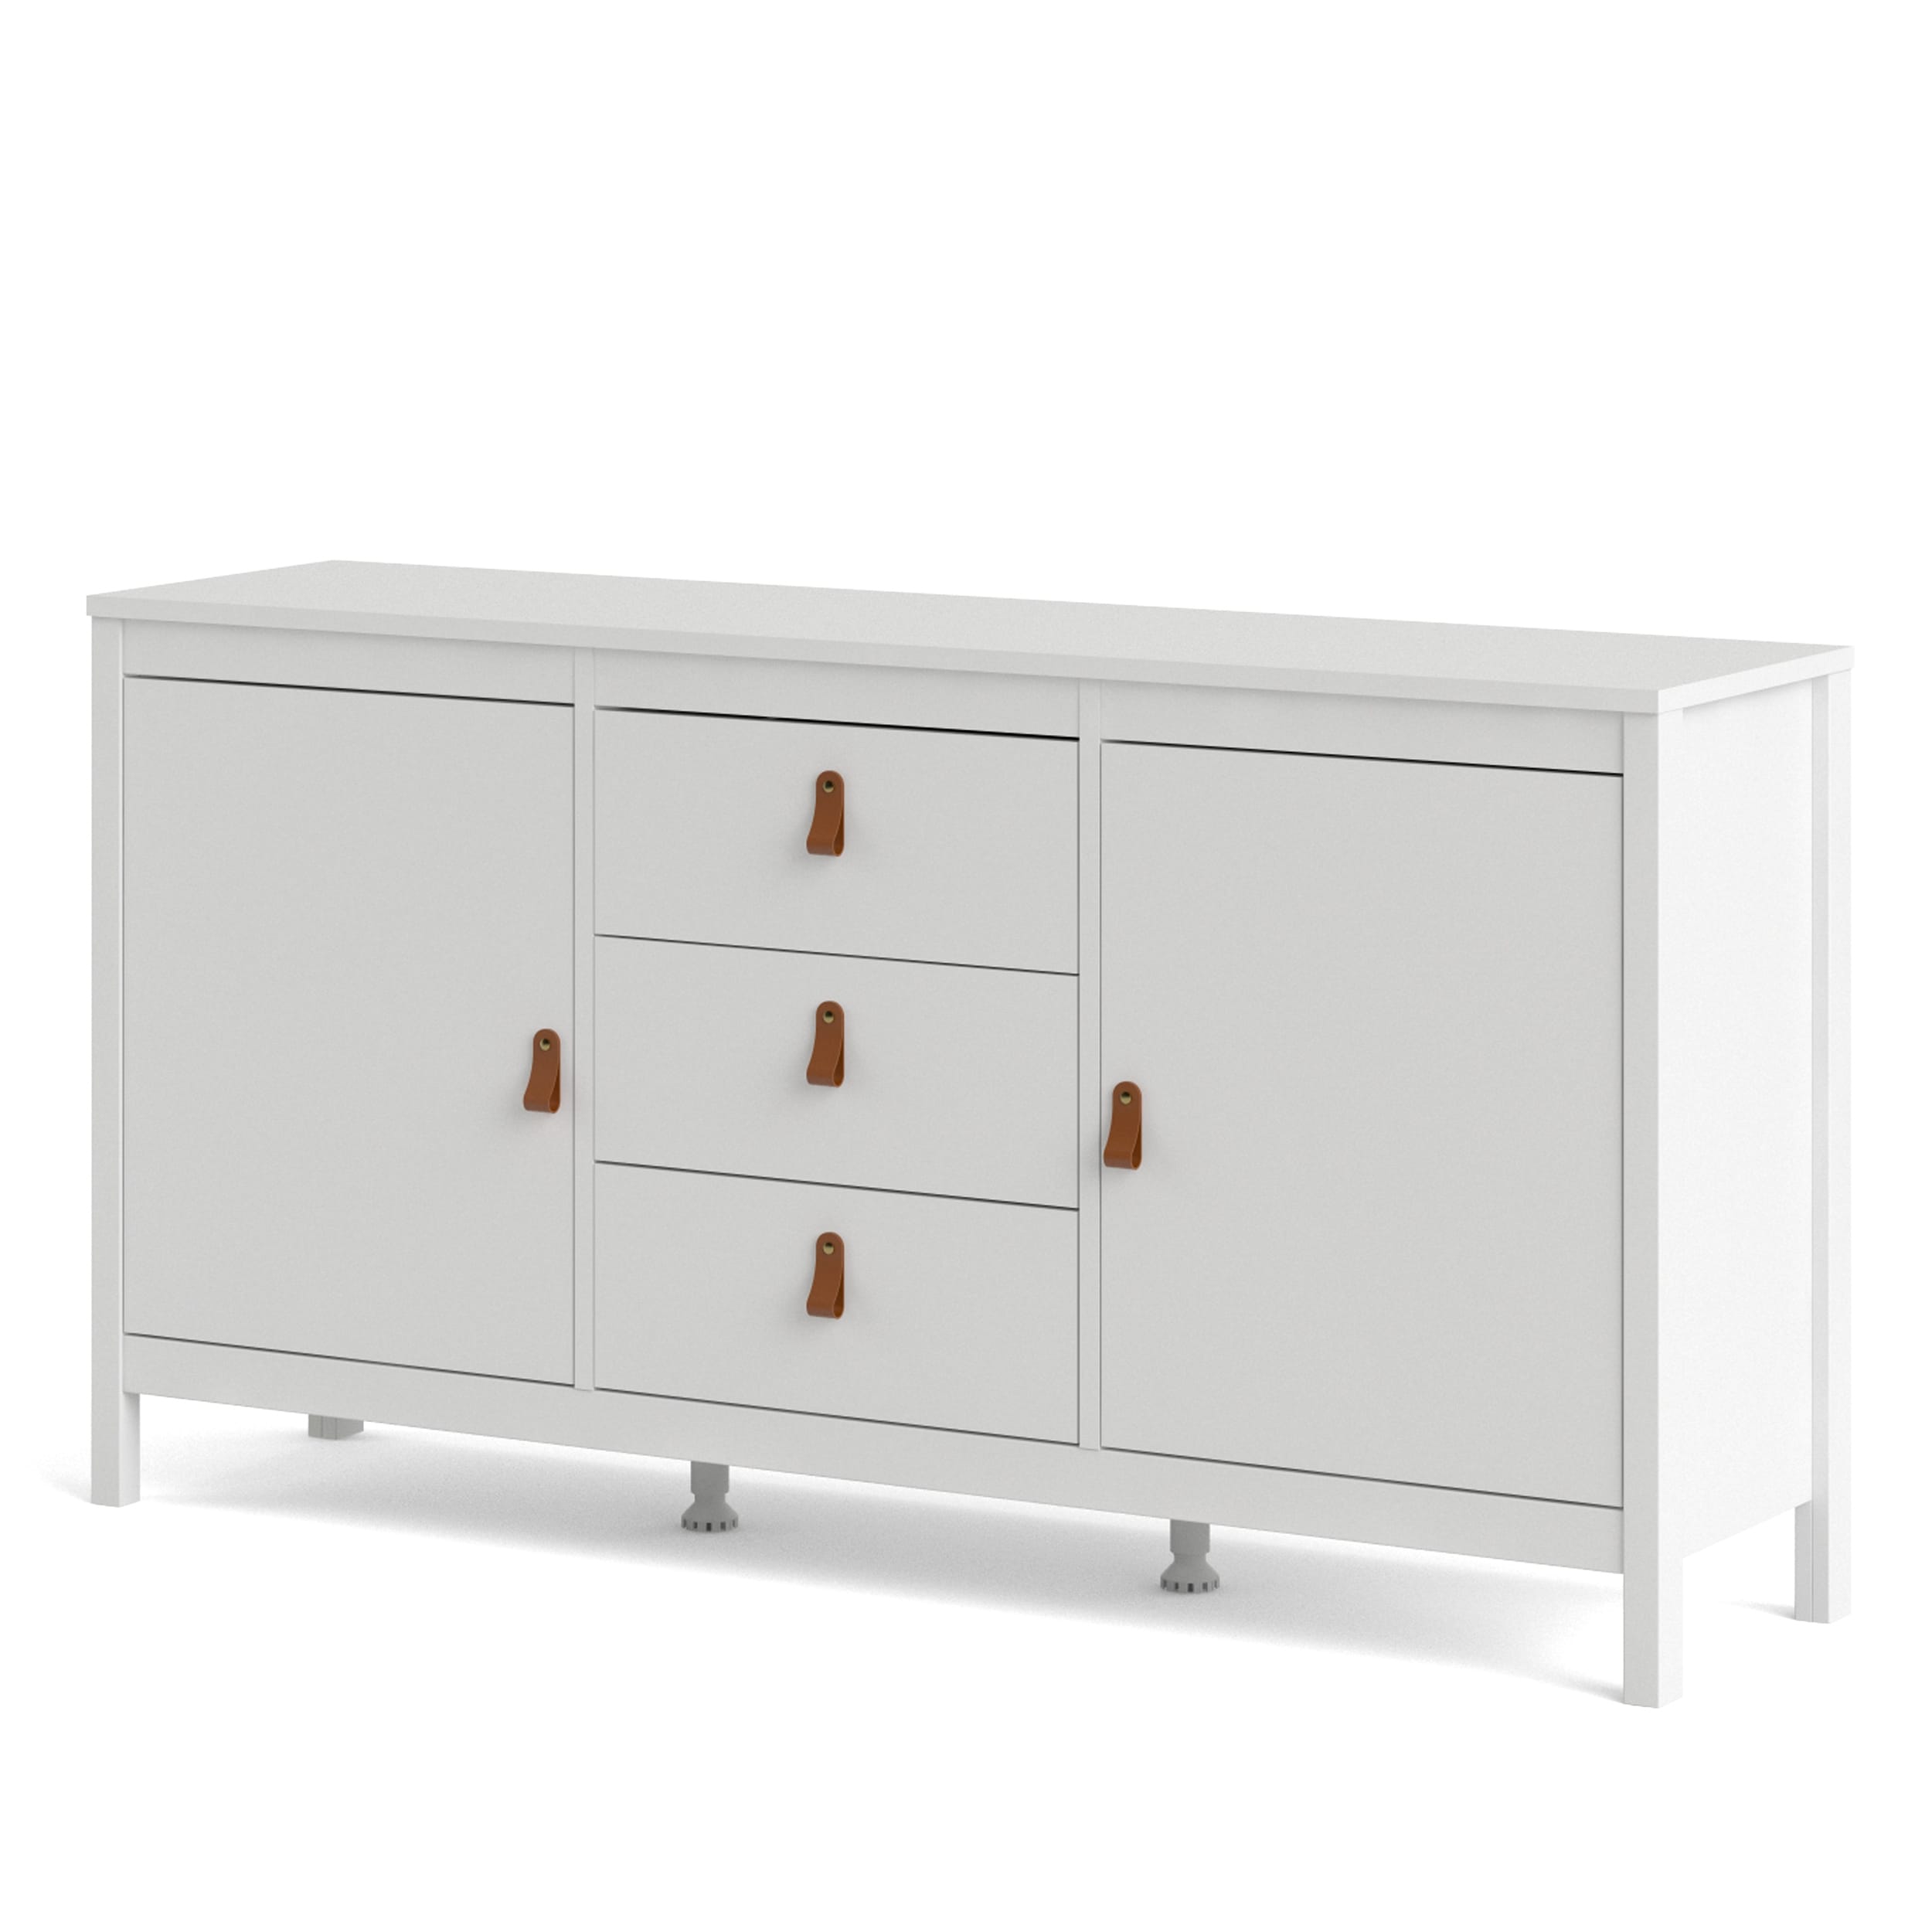 Sale 2-Door - & Madrid Bath Bed 33673465 Den Sideboard 3-Drawers - & with - On Porch Beyond